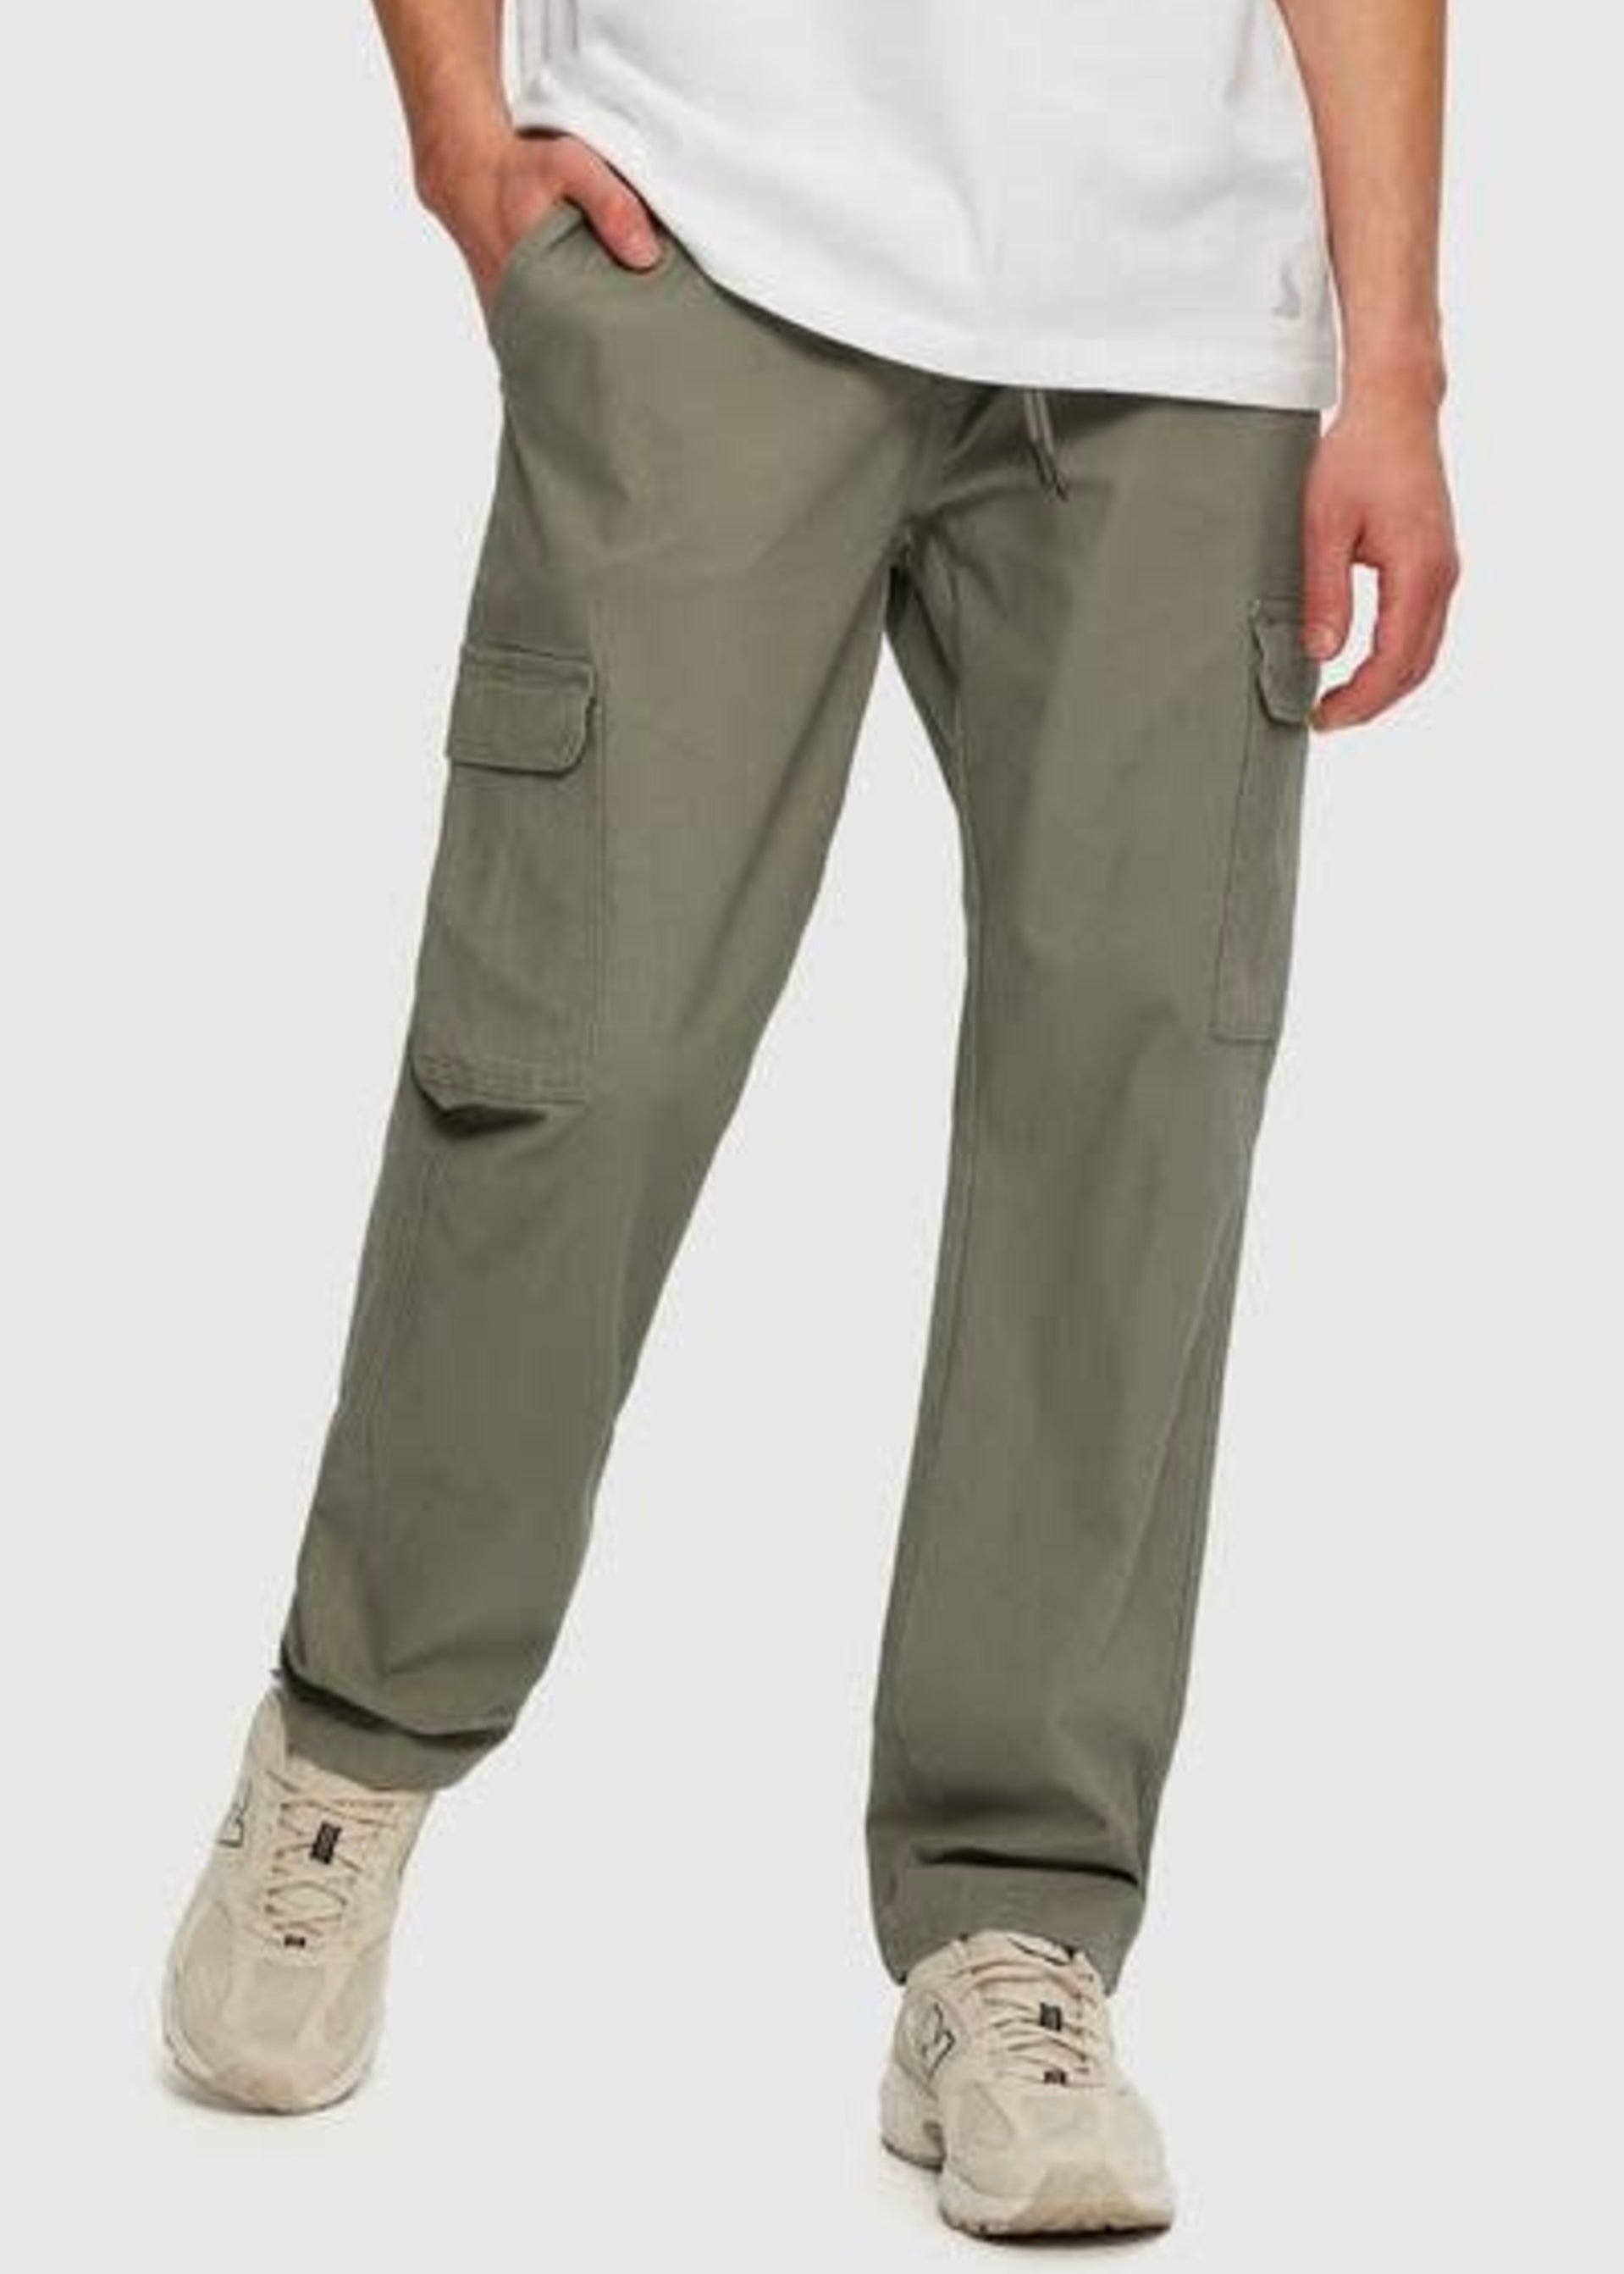 Kuwalla Double Cargo Pants – Dales Clothing for Men and Women